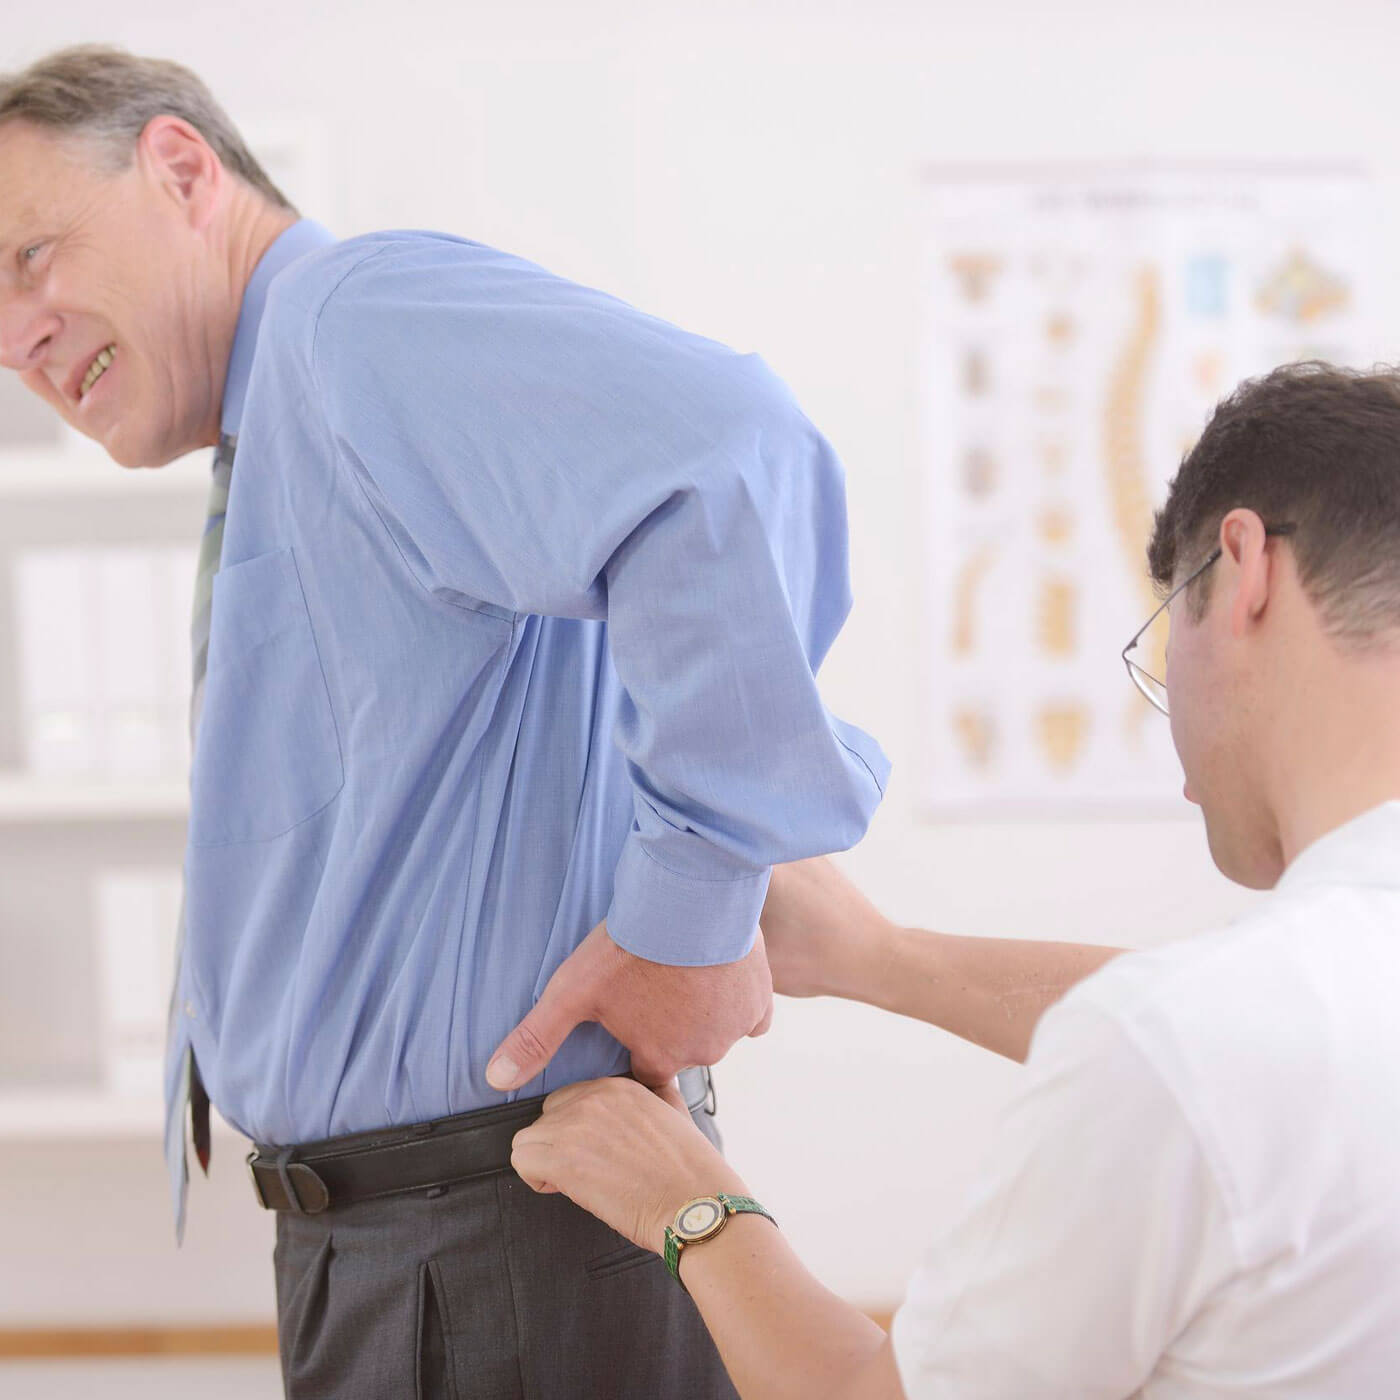 Essential Chiropractic and Healthcare Clinic - Disc Injury Treatment for Back Pain, Aged Man in Back Pain